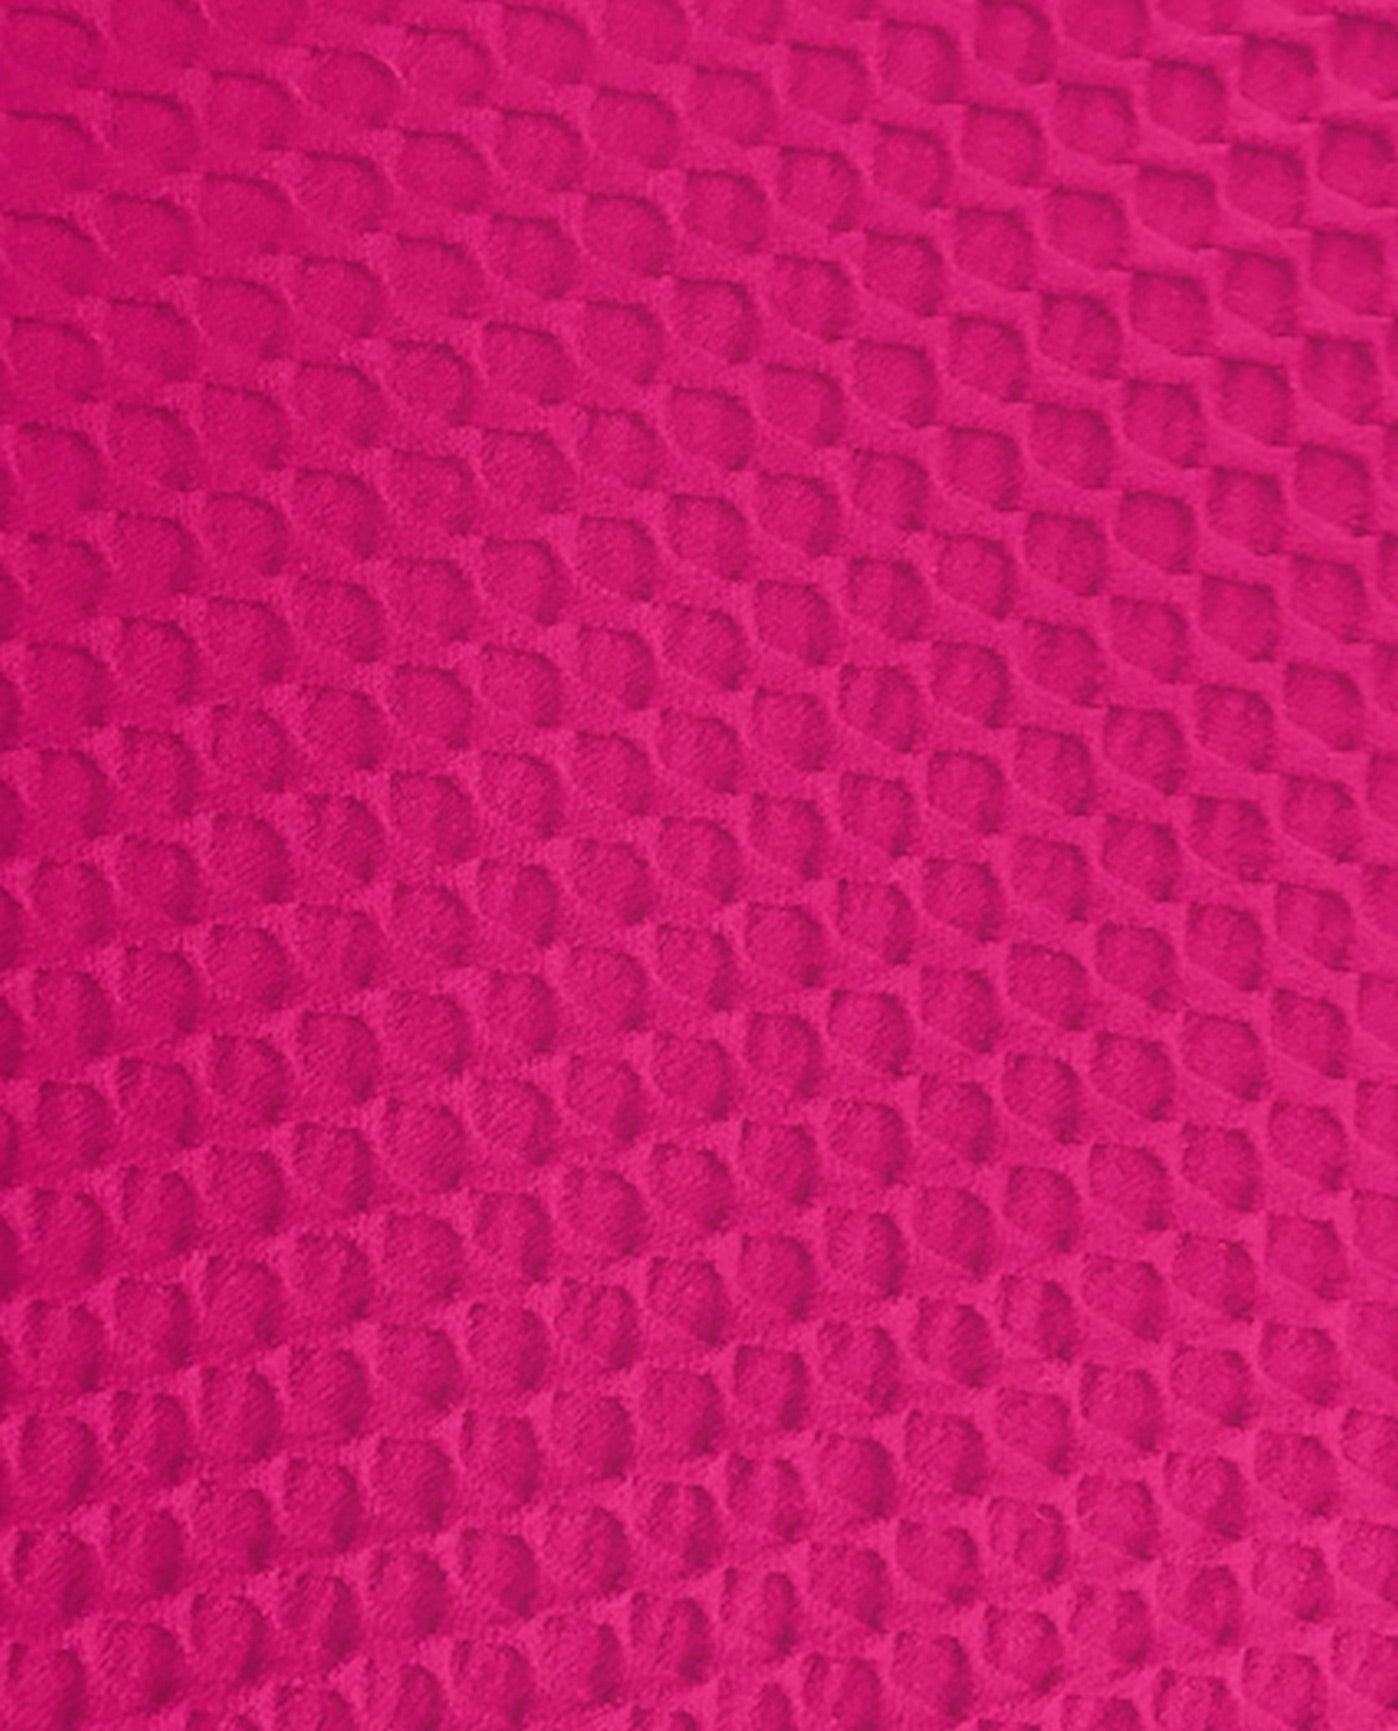 FABRIC SWATCH VIEW OF CHLORINE RESISTANT AQUAMORE COLOR BLOCK TEXTURED HIGH NECK ONE PIECE SWIMSUIT | 606 AQT TEXTURED PINK